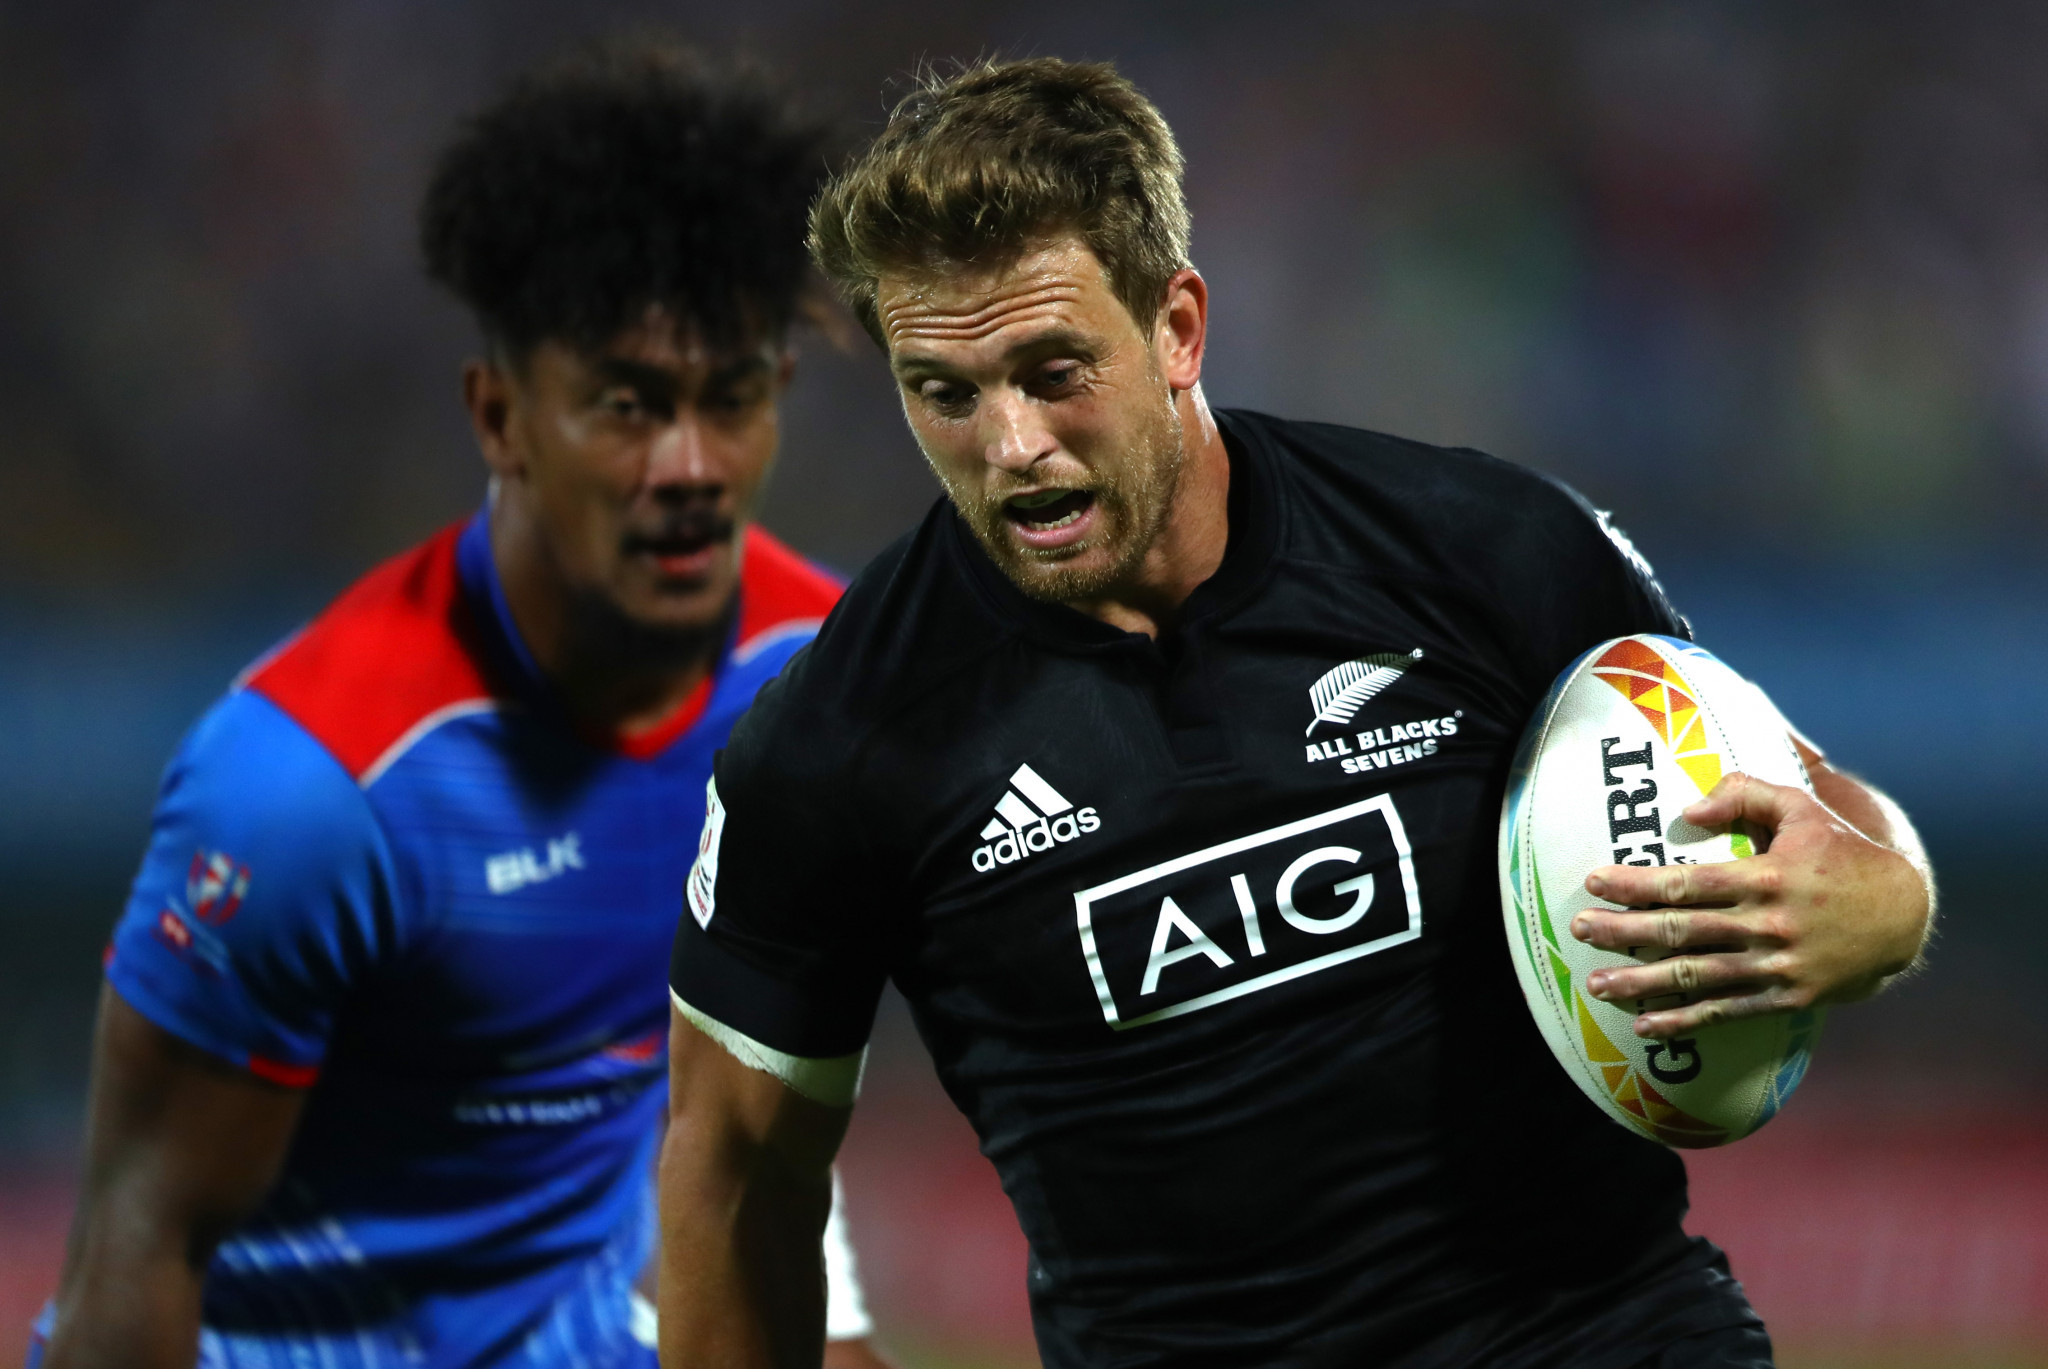 New Zealand rugby sevens star Curry to consider retirement after Tokyo 2020